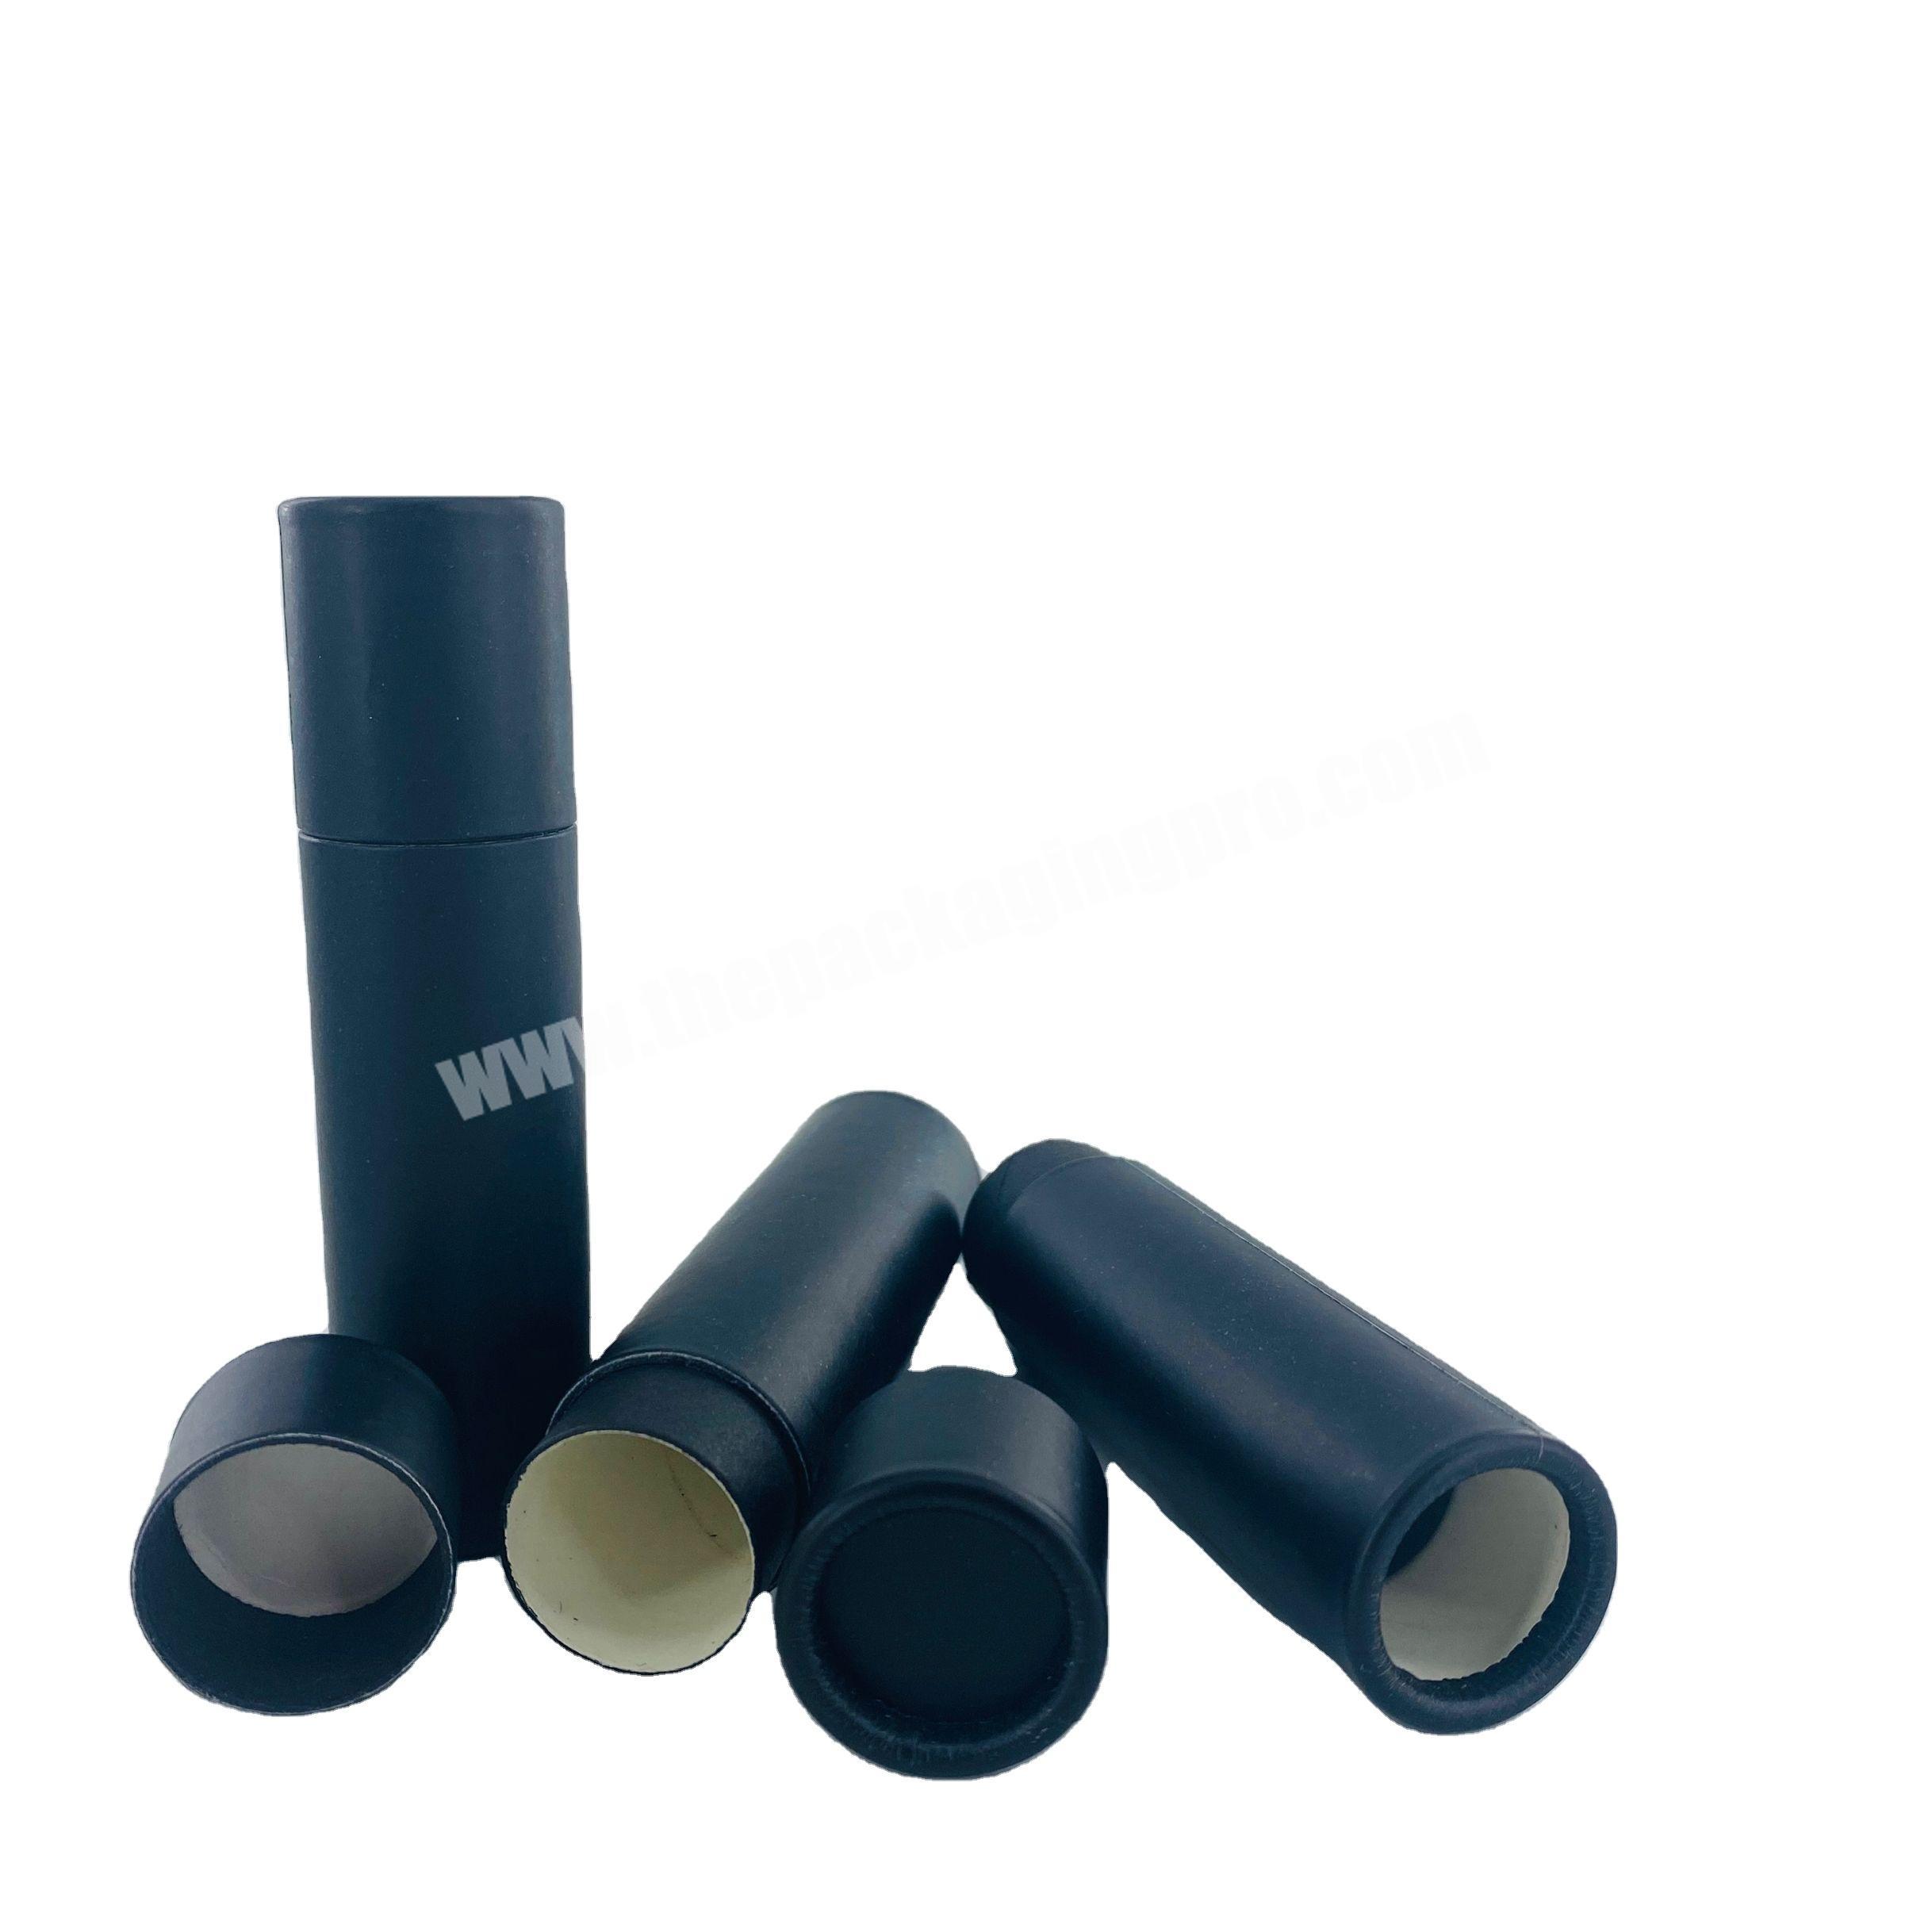 100% Recyclable Black Printing Paper Tube 0.3 oz Cardboard Tube For Lipstick Packaging